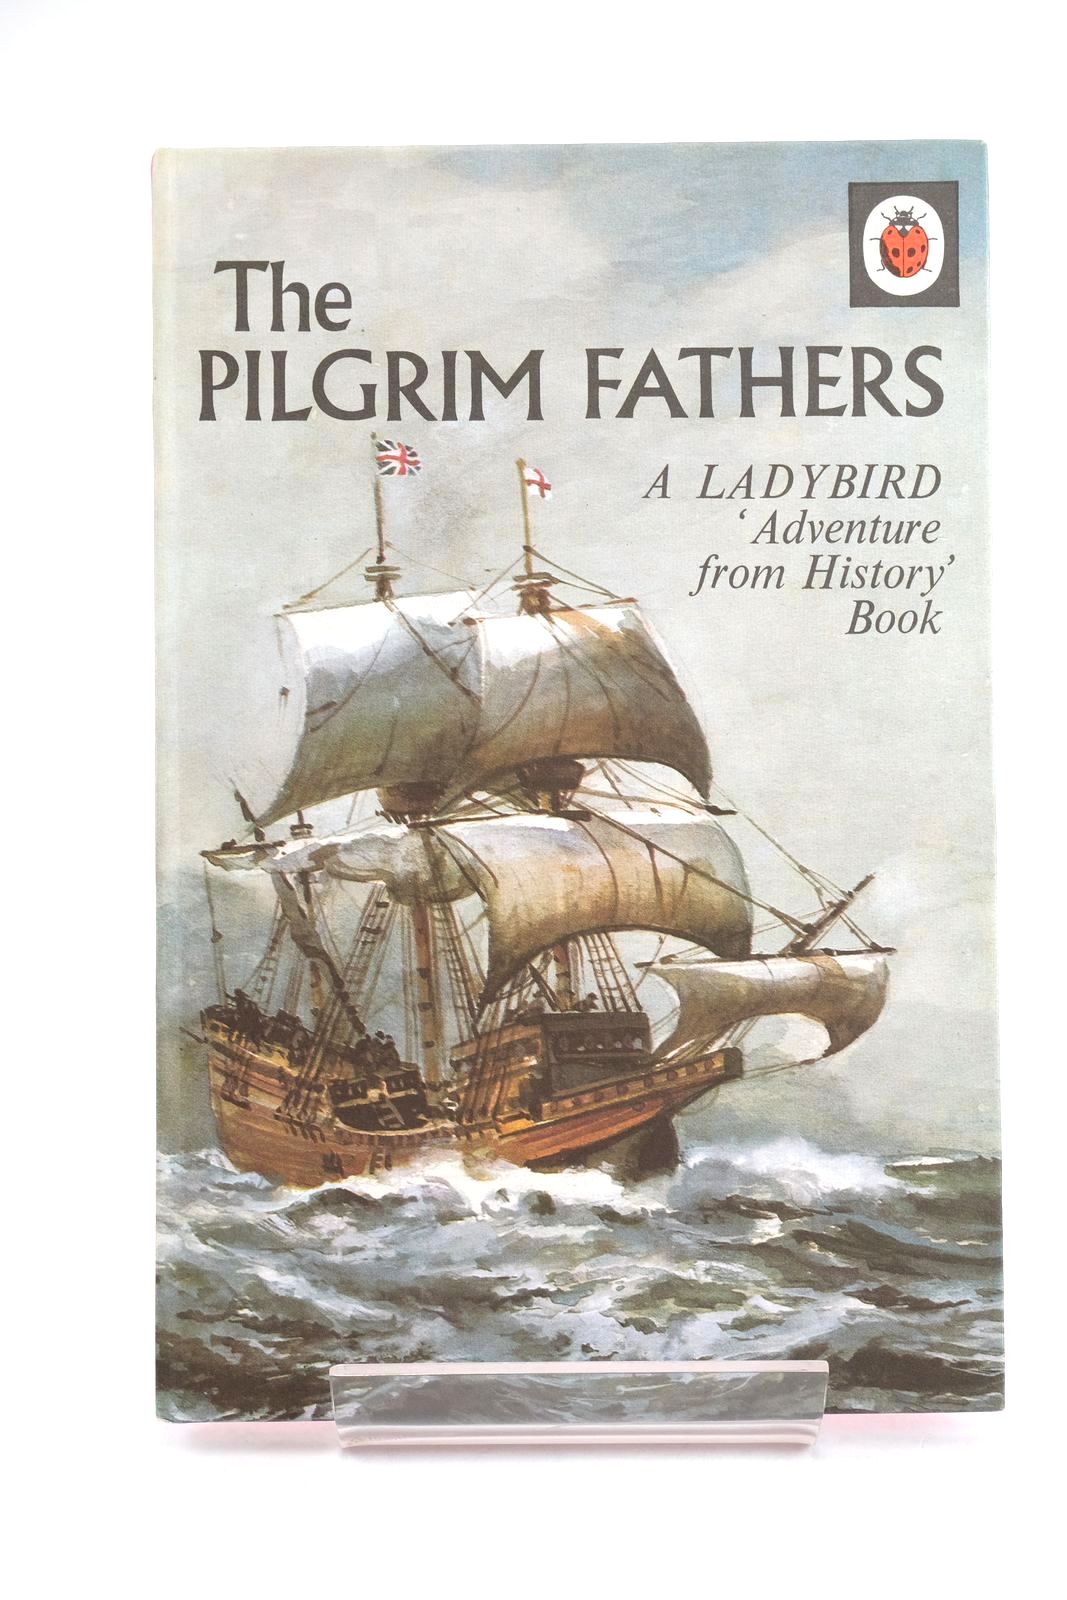 Photo of THE PILGRIM FATHERS written by Peach, L. Du Garde illustrated by Kenney, John published by Wills &amp; Hepworth Ltd. (STOCK CODE: 1324404)  for sale by Stella & Rose's Books